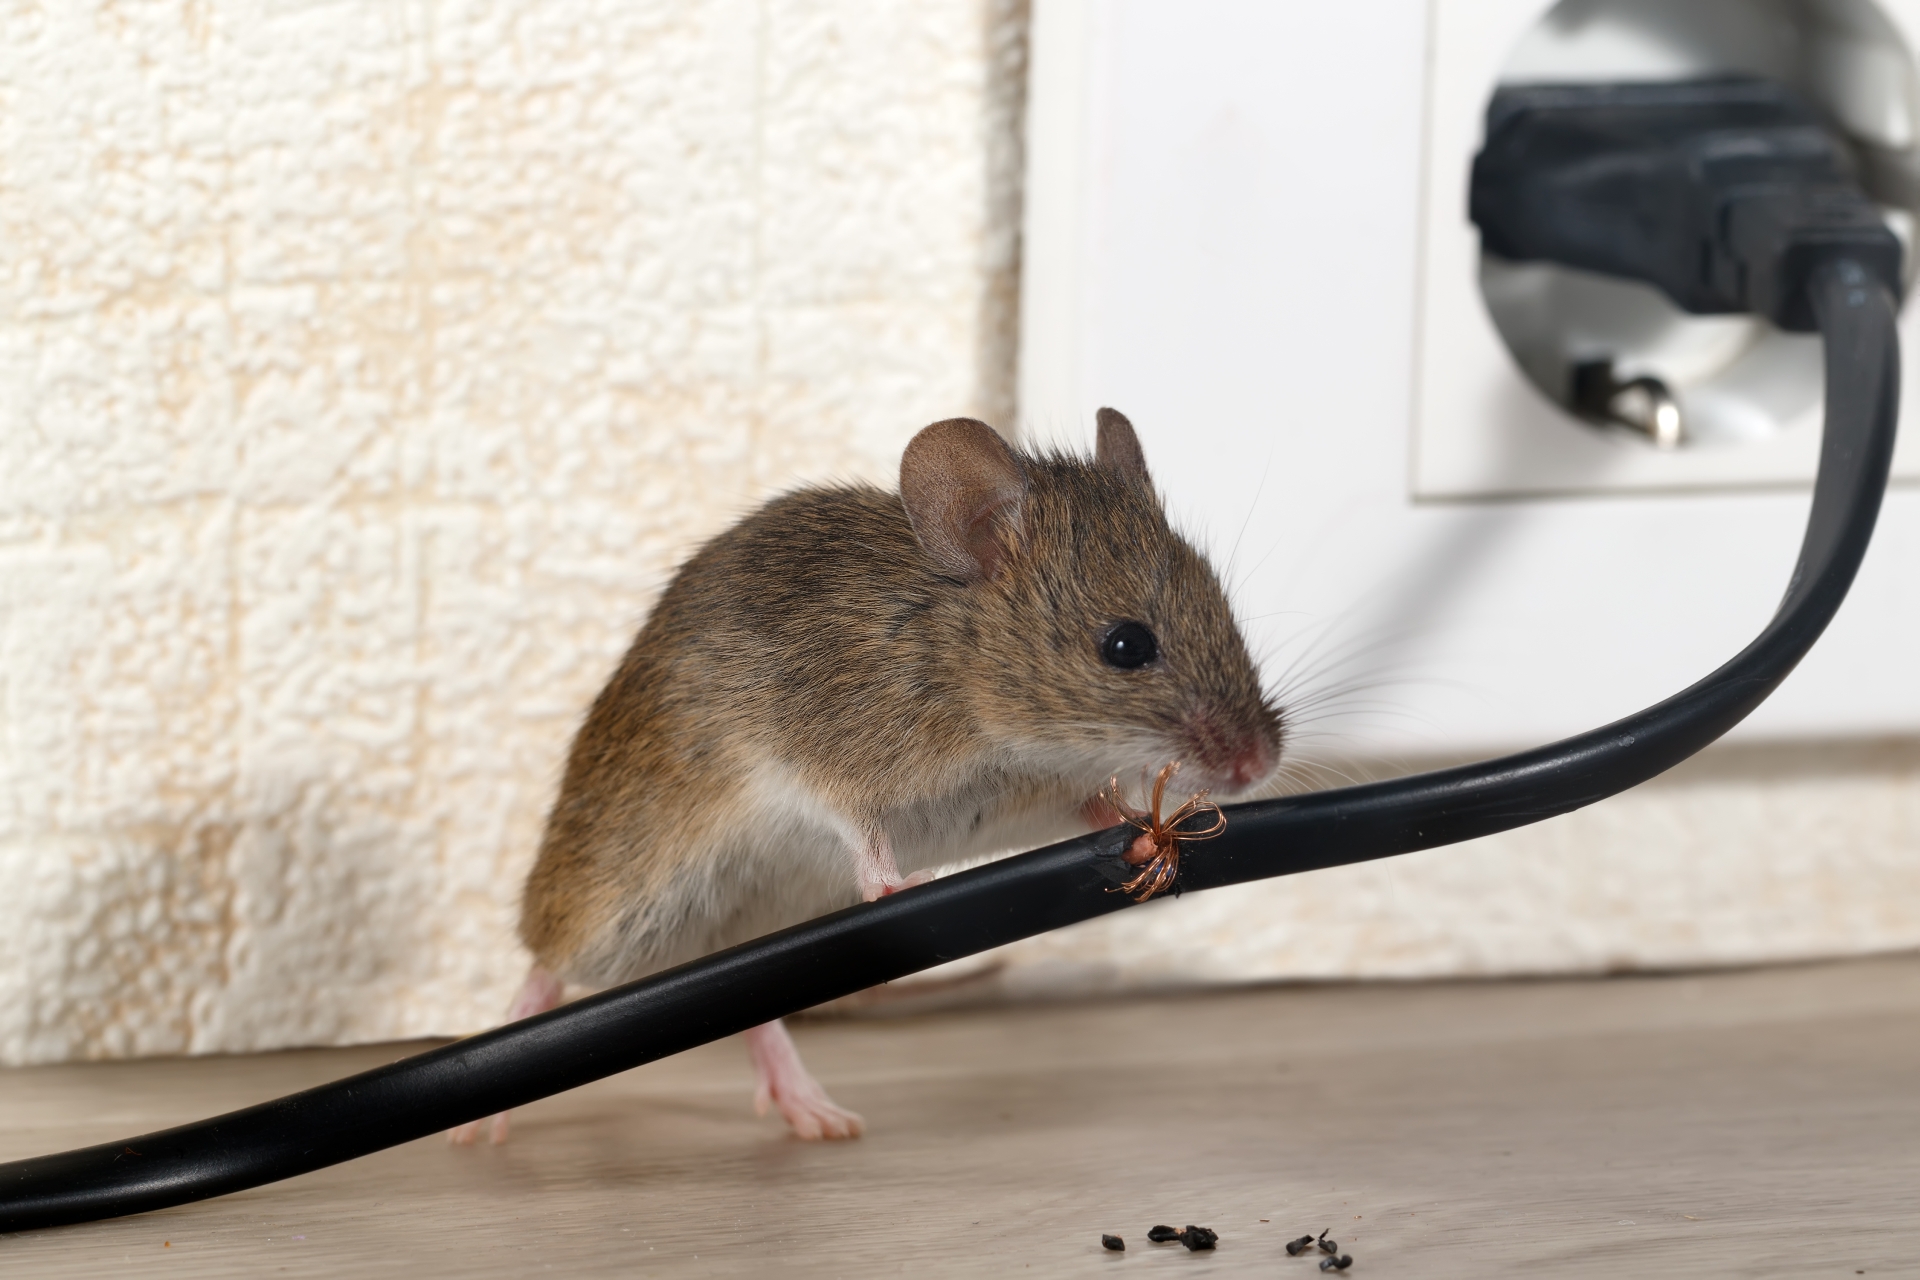 Mice Infestation, Pest Control in Moorgate, Liverpool Street, EC2. Call Now 020 8166 9746